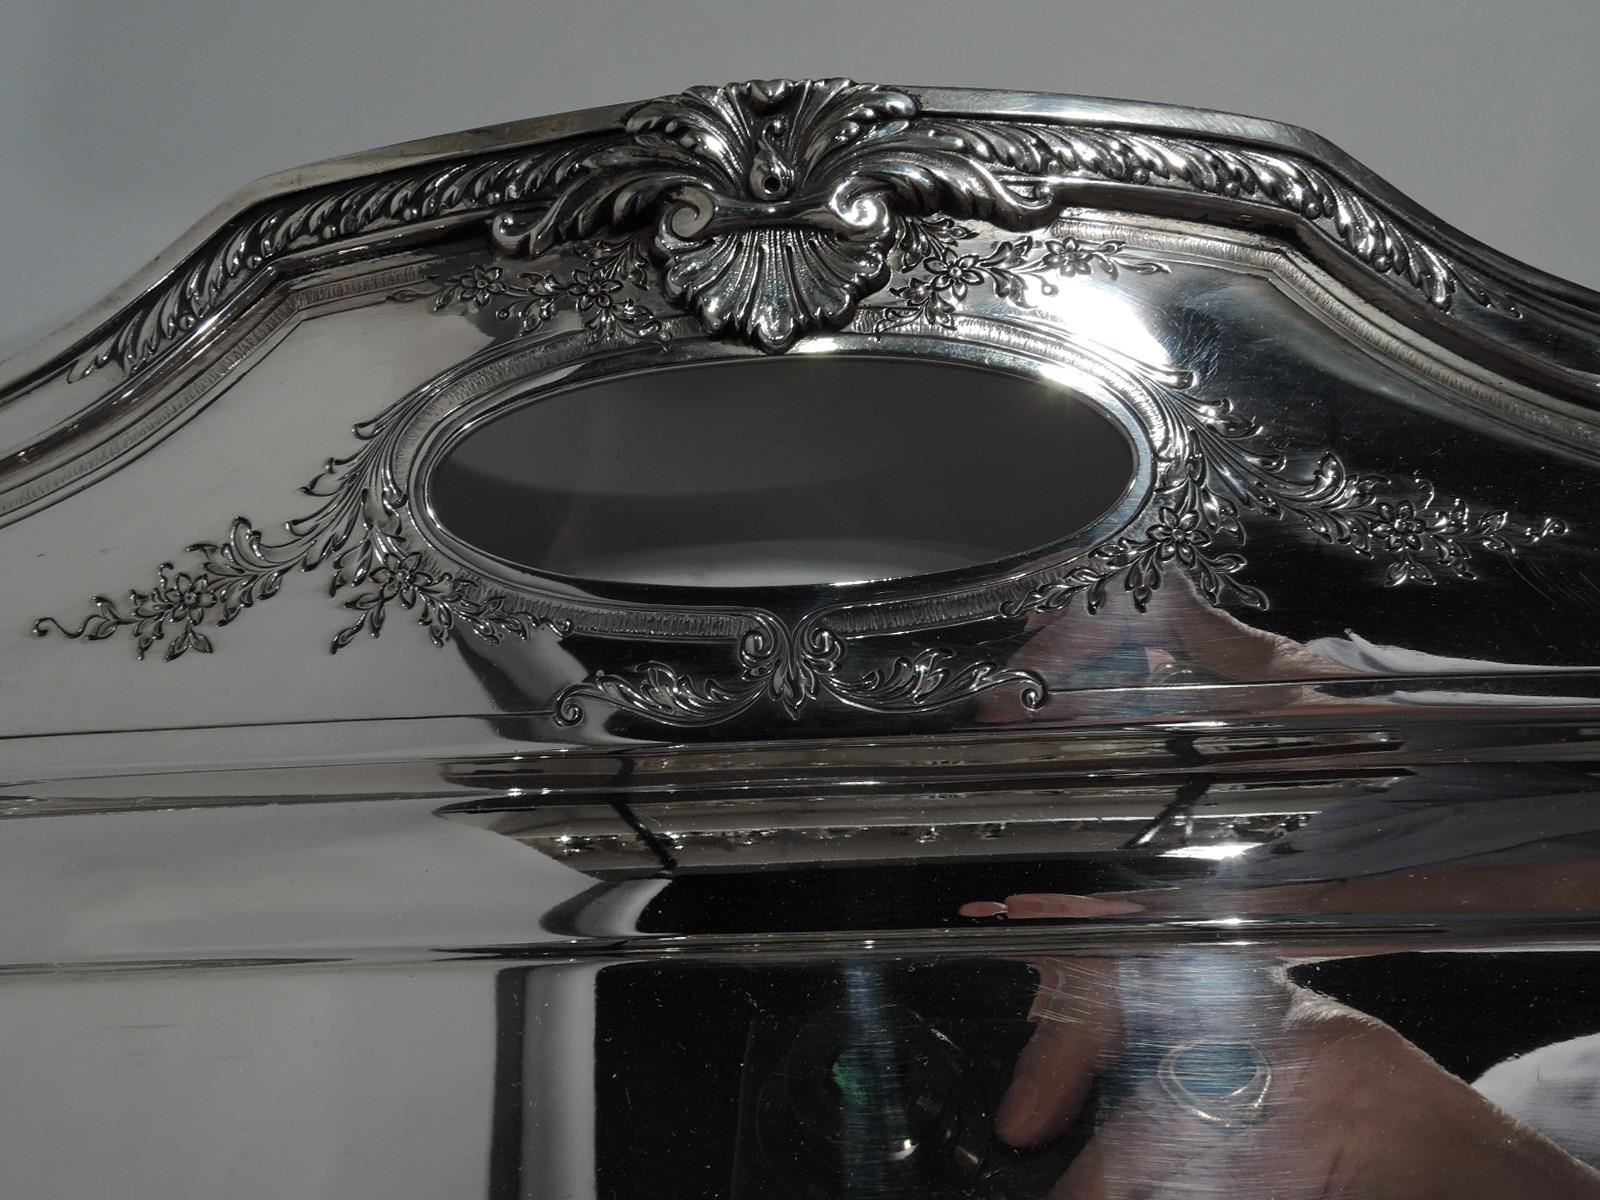 Edwardian sterling silver tea tray in Heritage pattern. Made by Reed & Barton in Taunton, Mass., circa 1925. Rectangular well with curved corners, flat shoulder, chamfered corners and shaped ends with cutout oval handles. Chased and applied